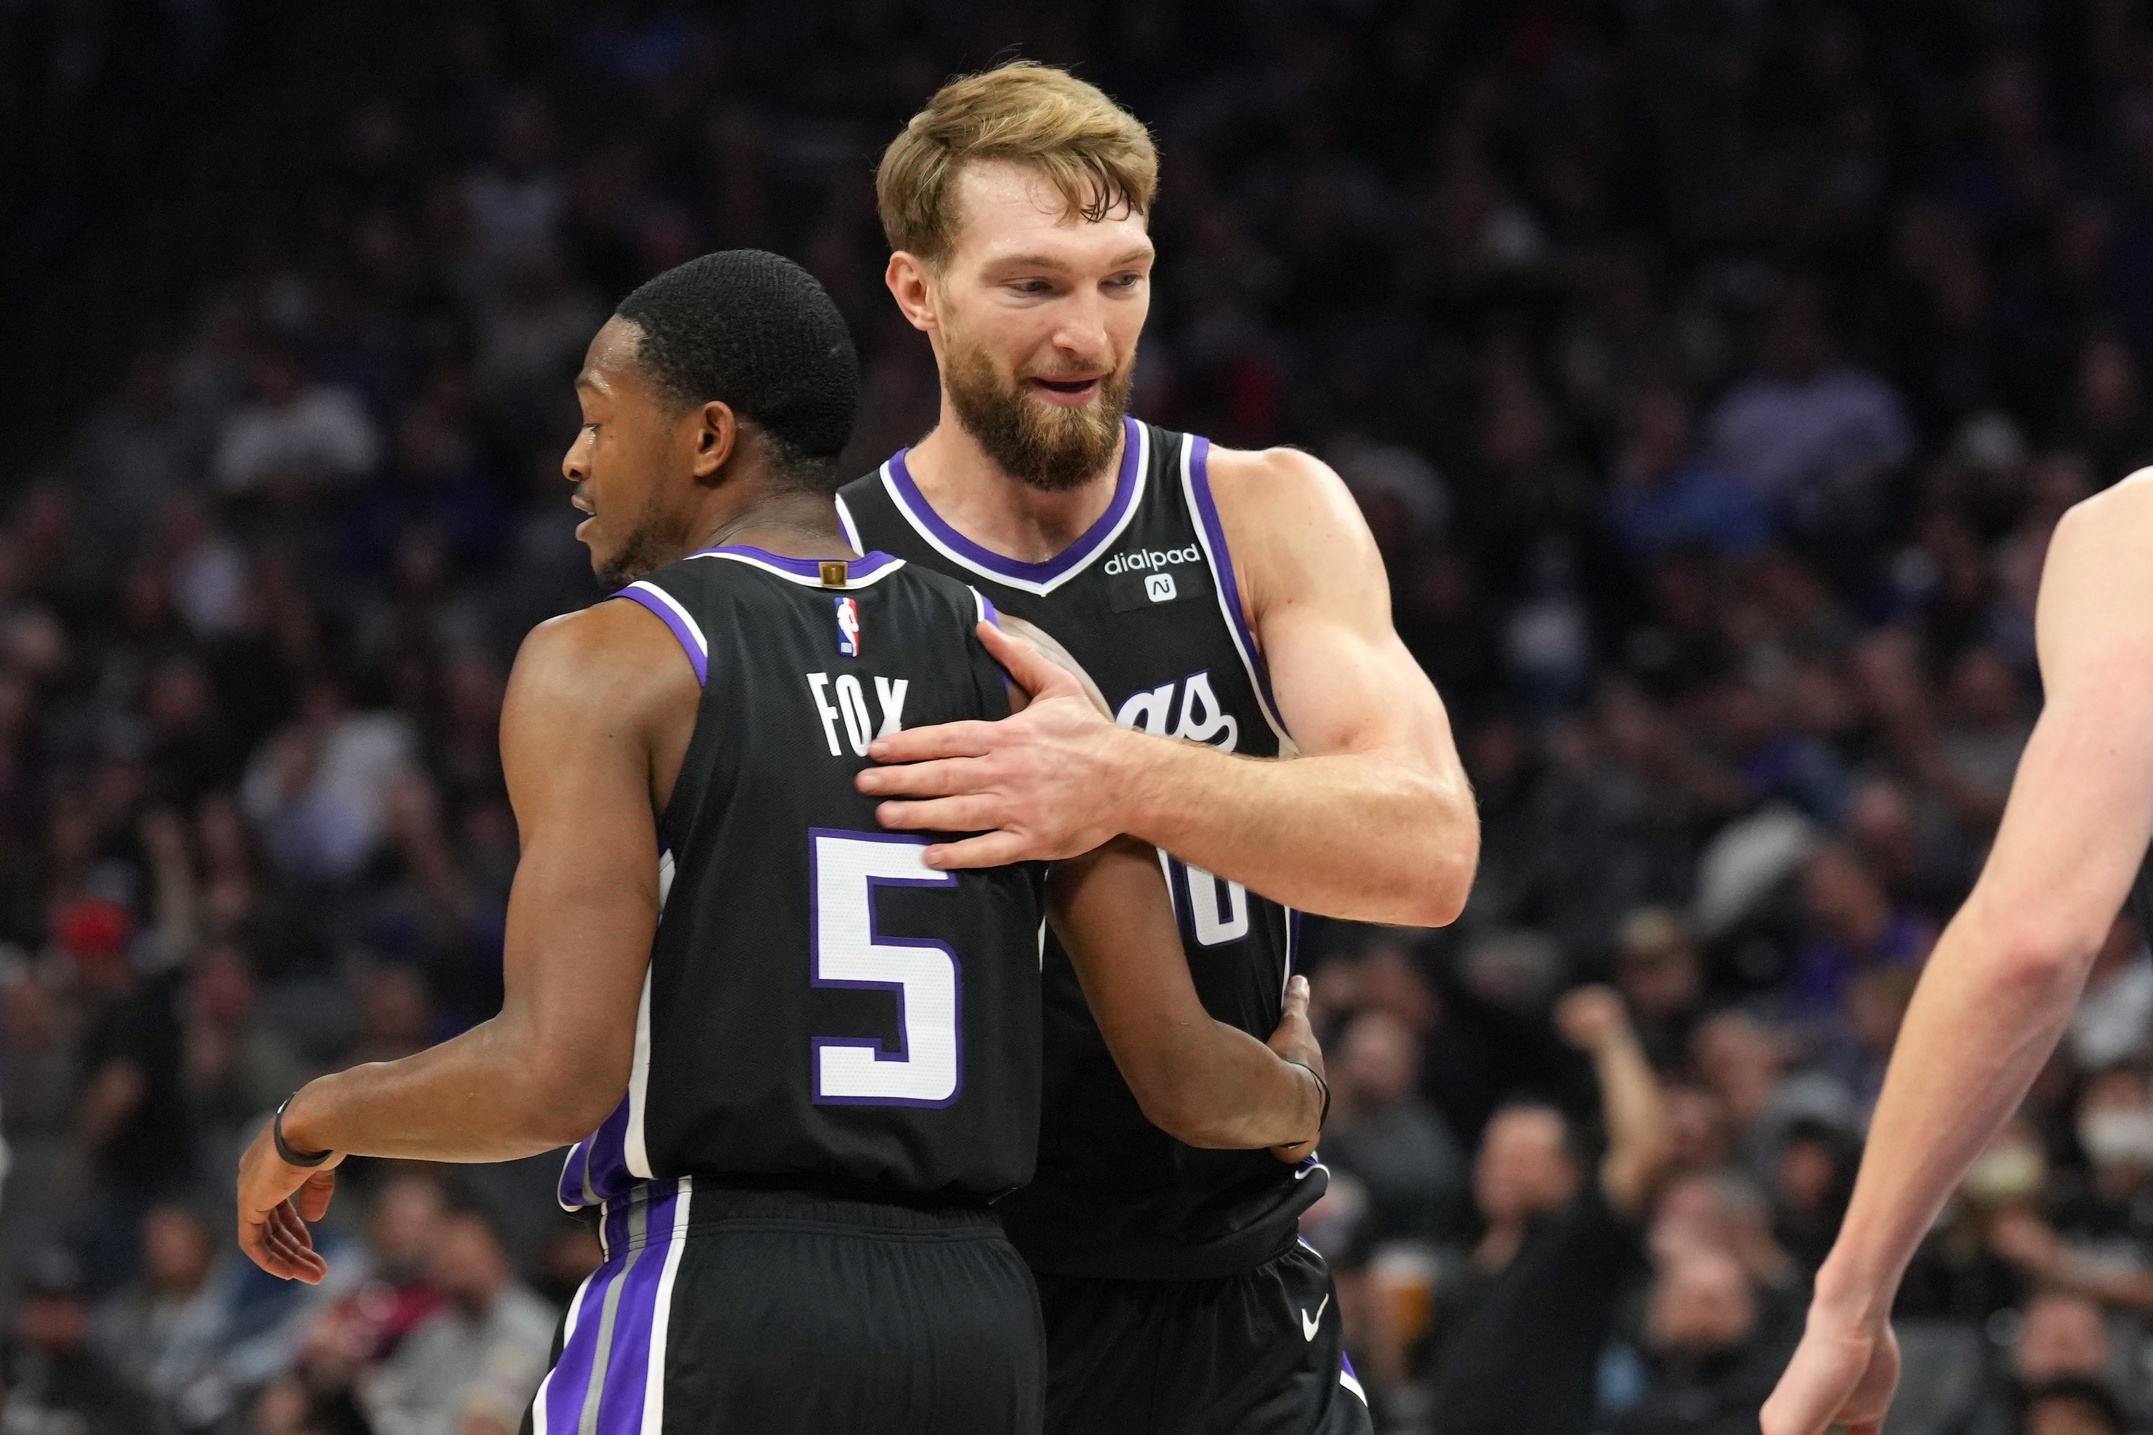 Sacramento Kings guard De'Aaron Fox (5) is congratulated by forward Domantas Sabonis (10) after a basket against the Oklahoma City Thunder during the second quarter at Golden 1 Center.